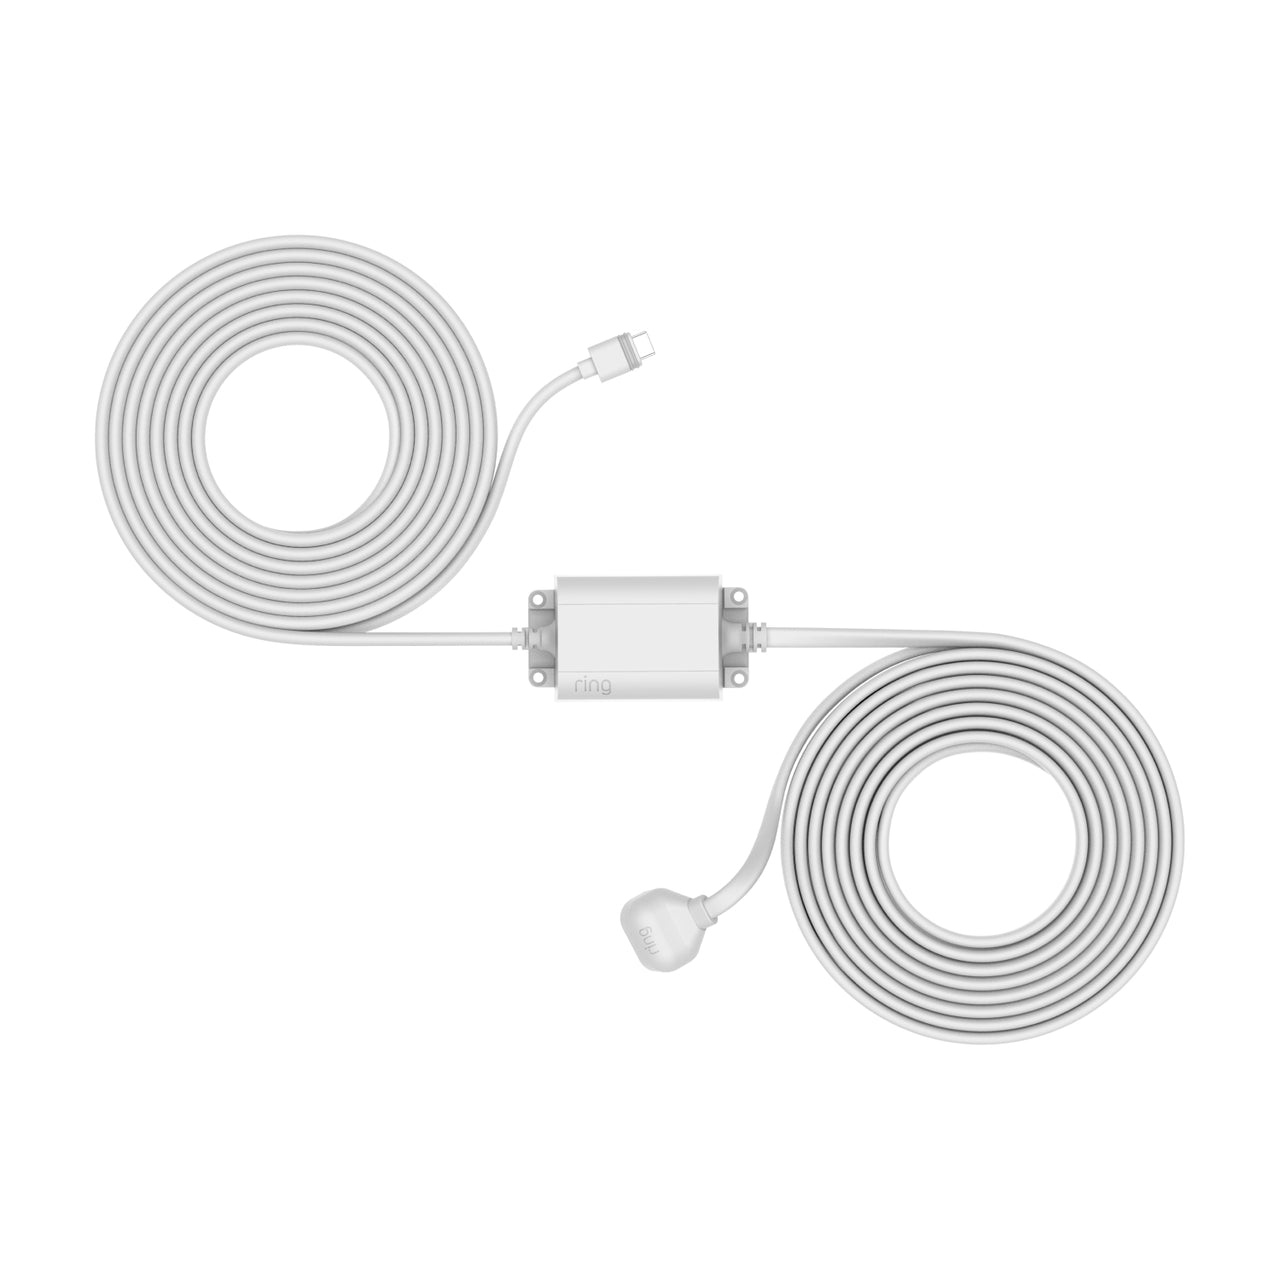 products/ring_indoor_outdoor_power_adapter_usb-c_assembled_wht_1500x1500_1.jpg